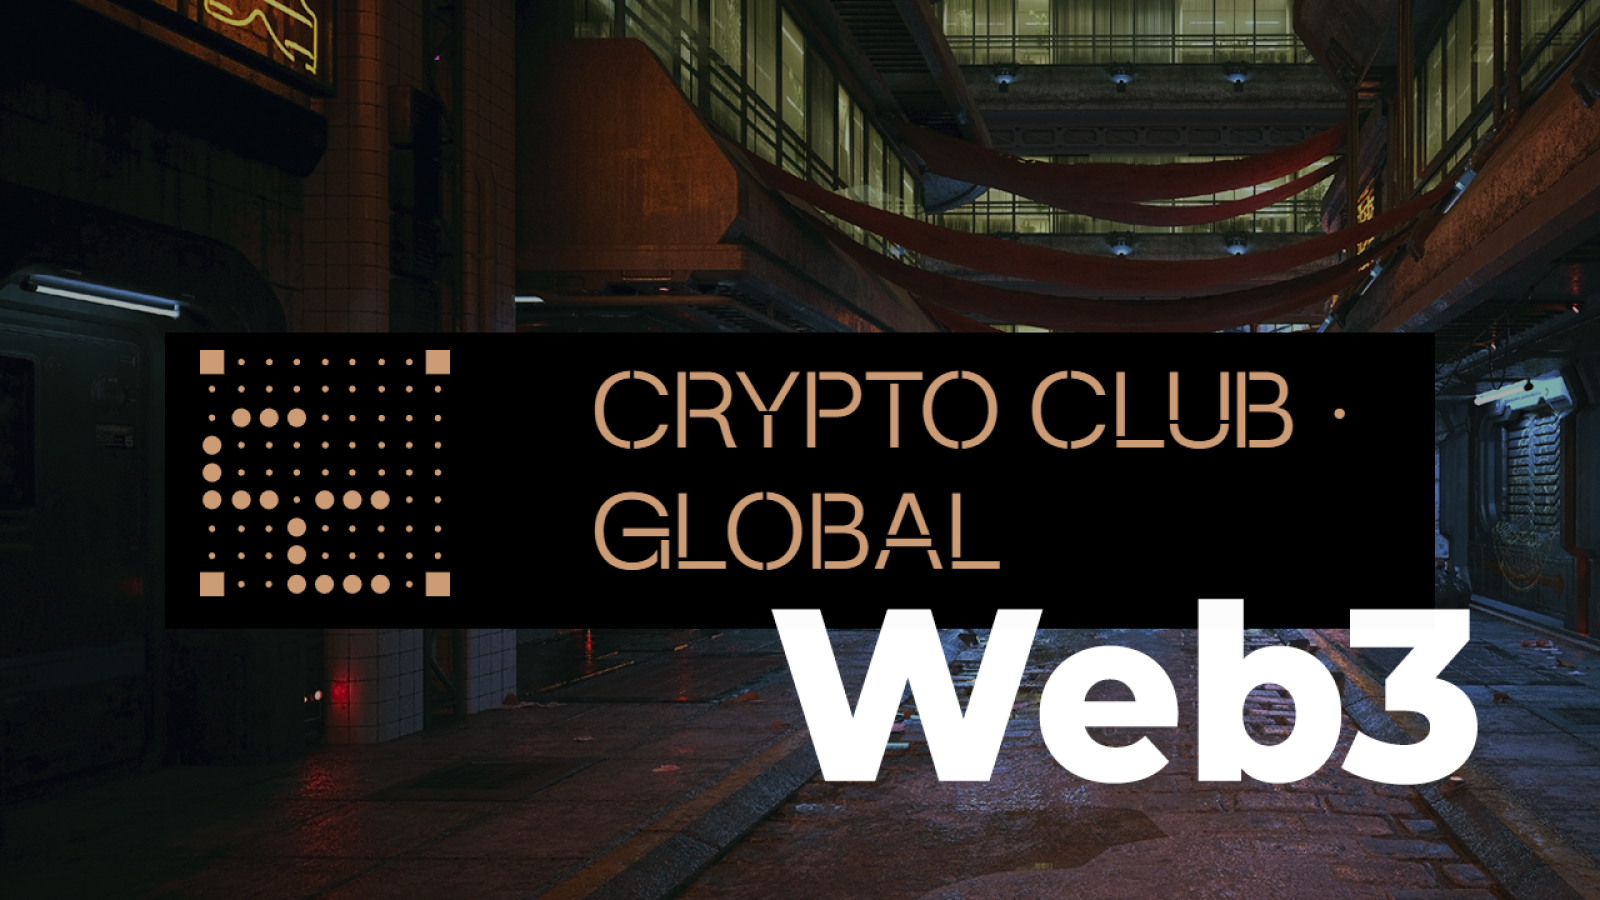 An Exclusive Members Club for Web3 Enthusiasts is Launching. Introducing Crypto Club Global, Where an NFT Represents Your Lifetime Membership